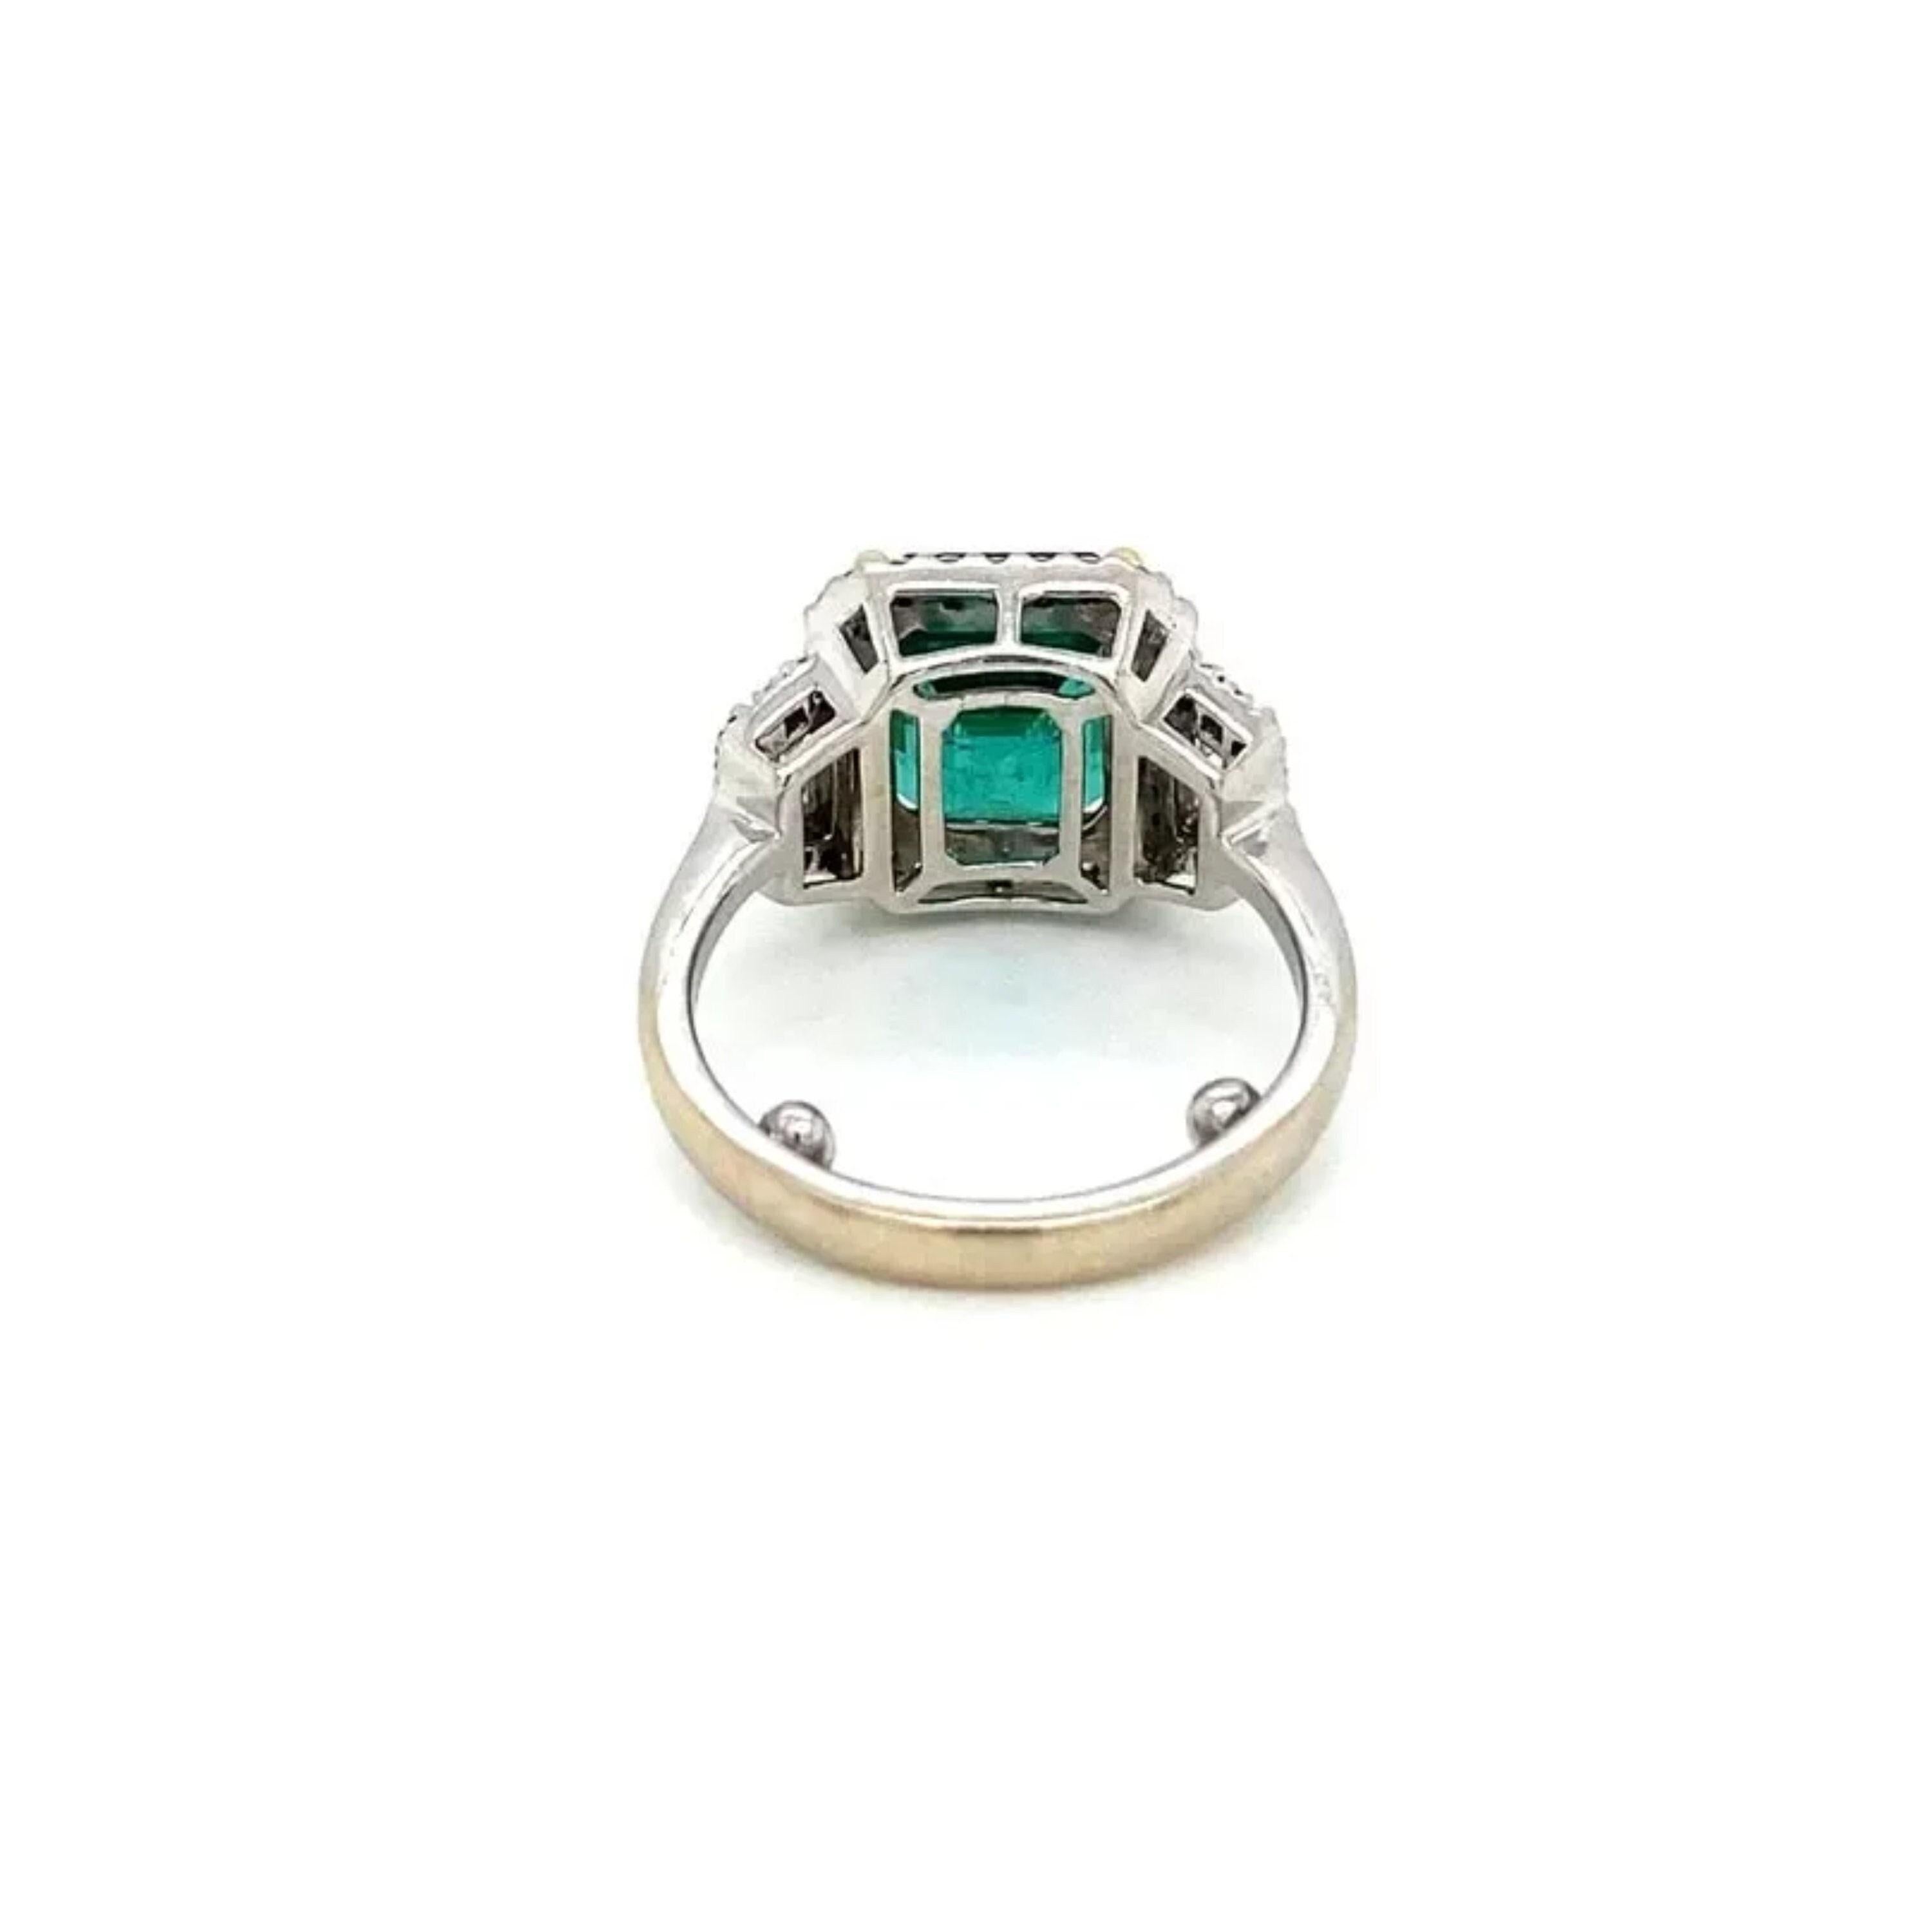 For Sale:  Emerald Engagement Ring, Emerald Cut Emerald Wedding Ring 5